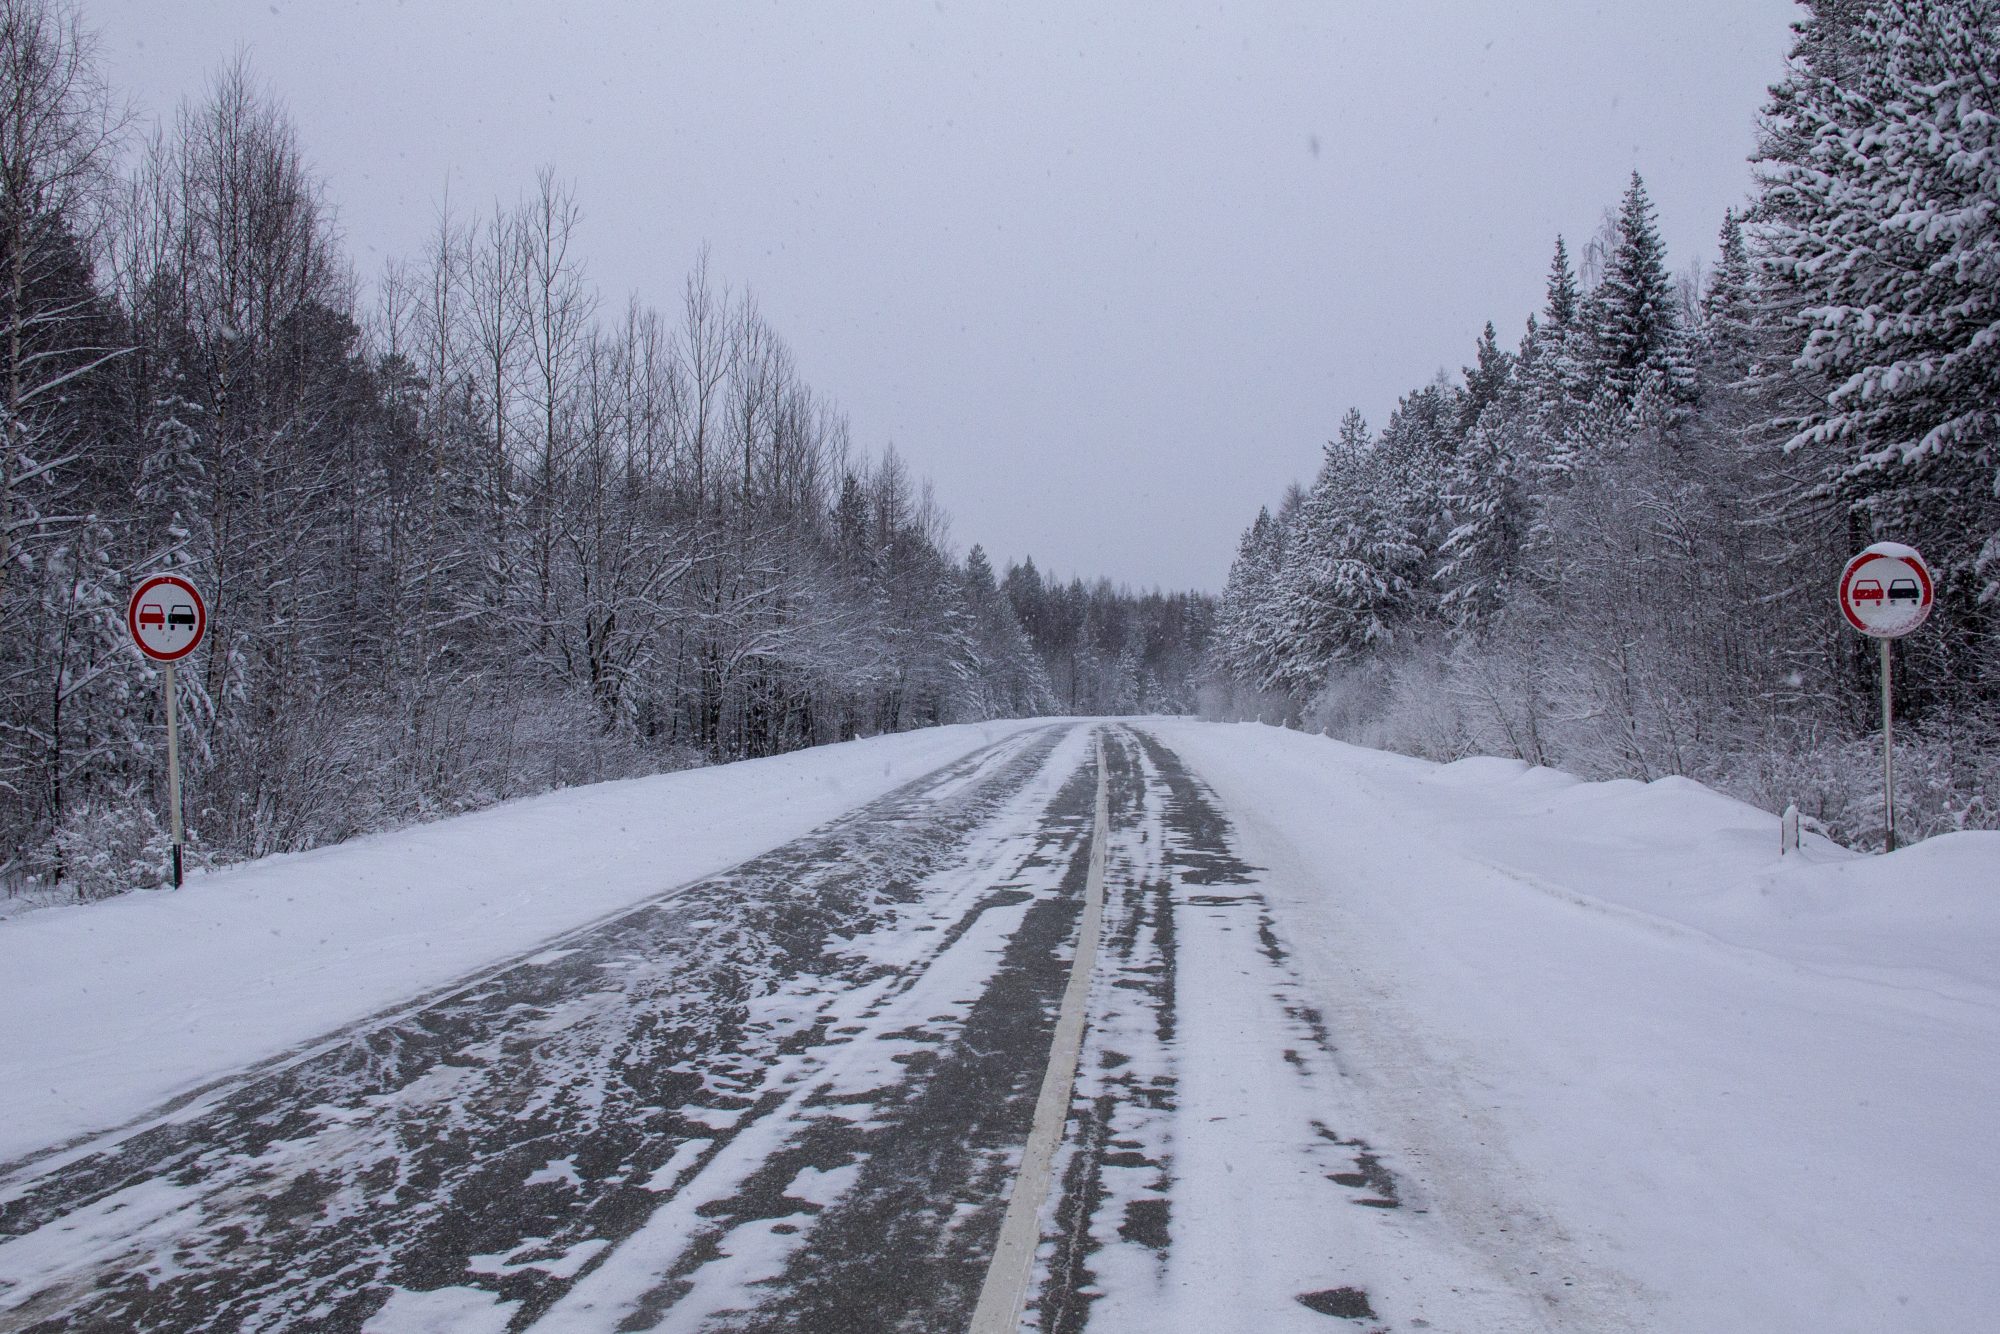 Unseasonably warm weather makes for dicey start to new 'Ice Road Truckers'  season